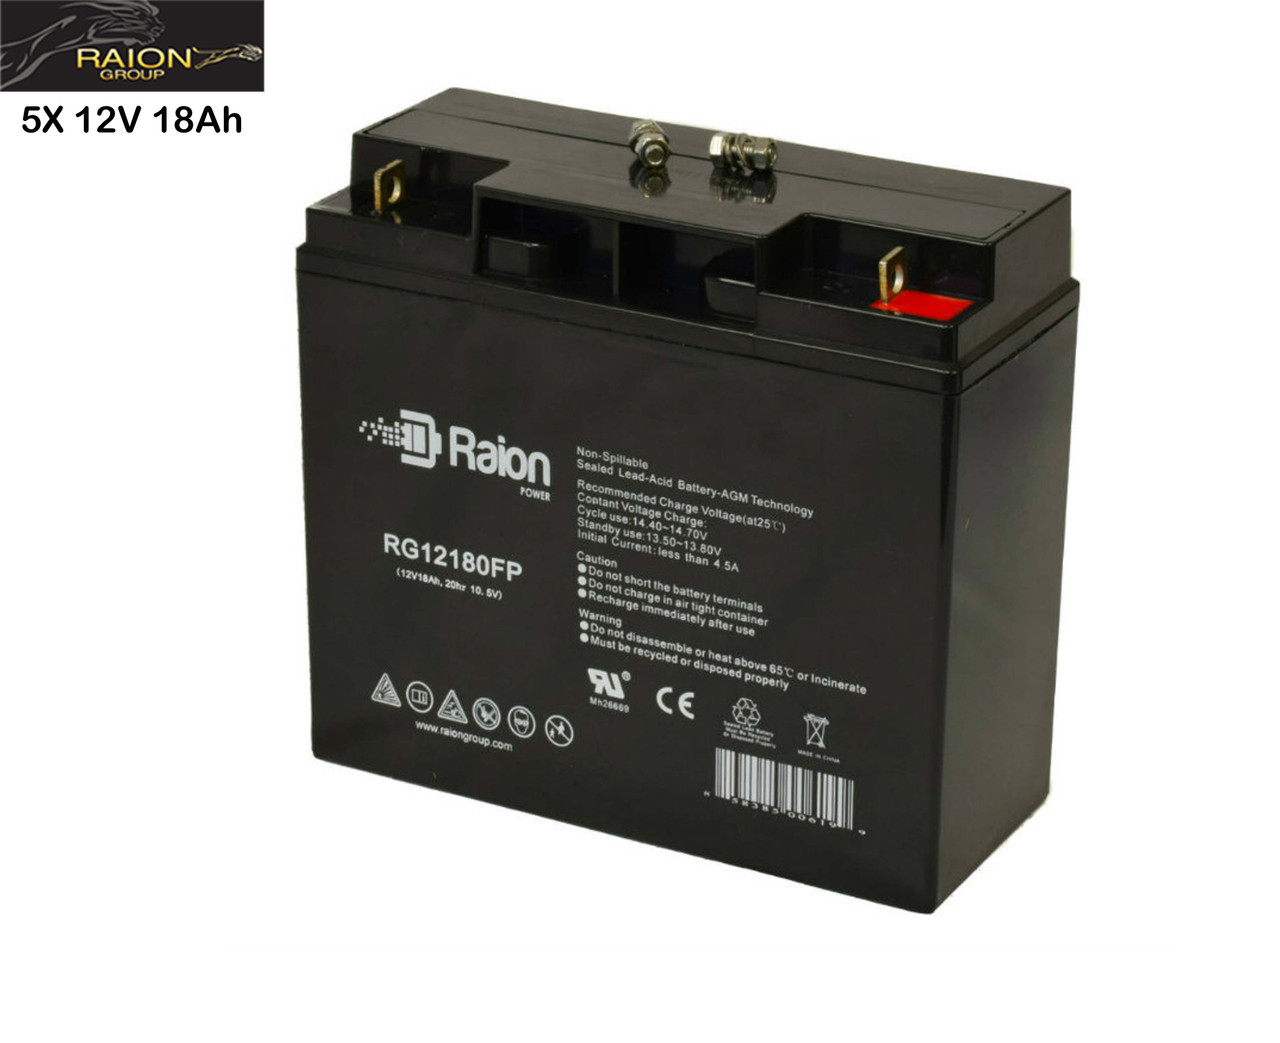 Raion Power Replacement 12V 18Ah Battery for Volt Canada Rebel - 5 Pack